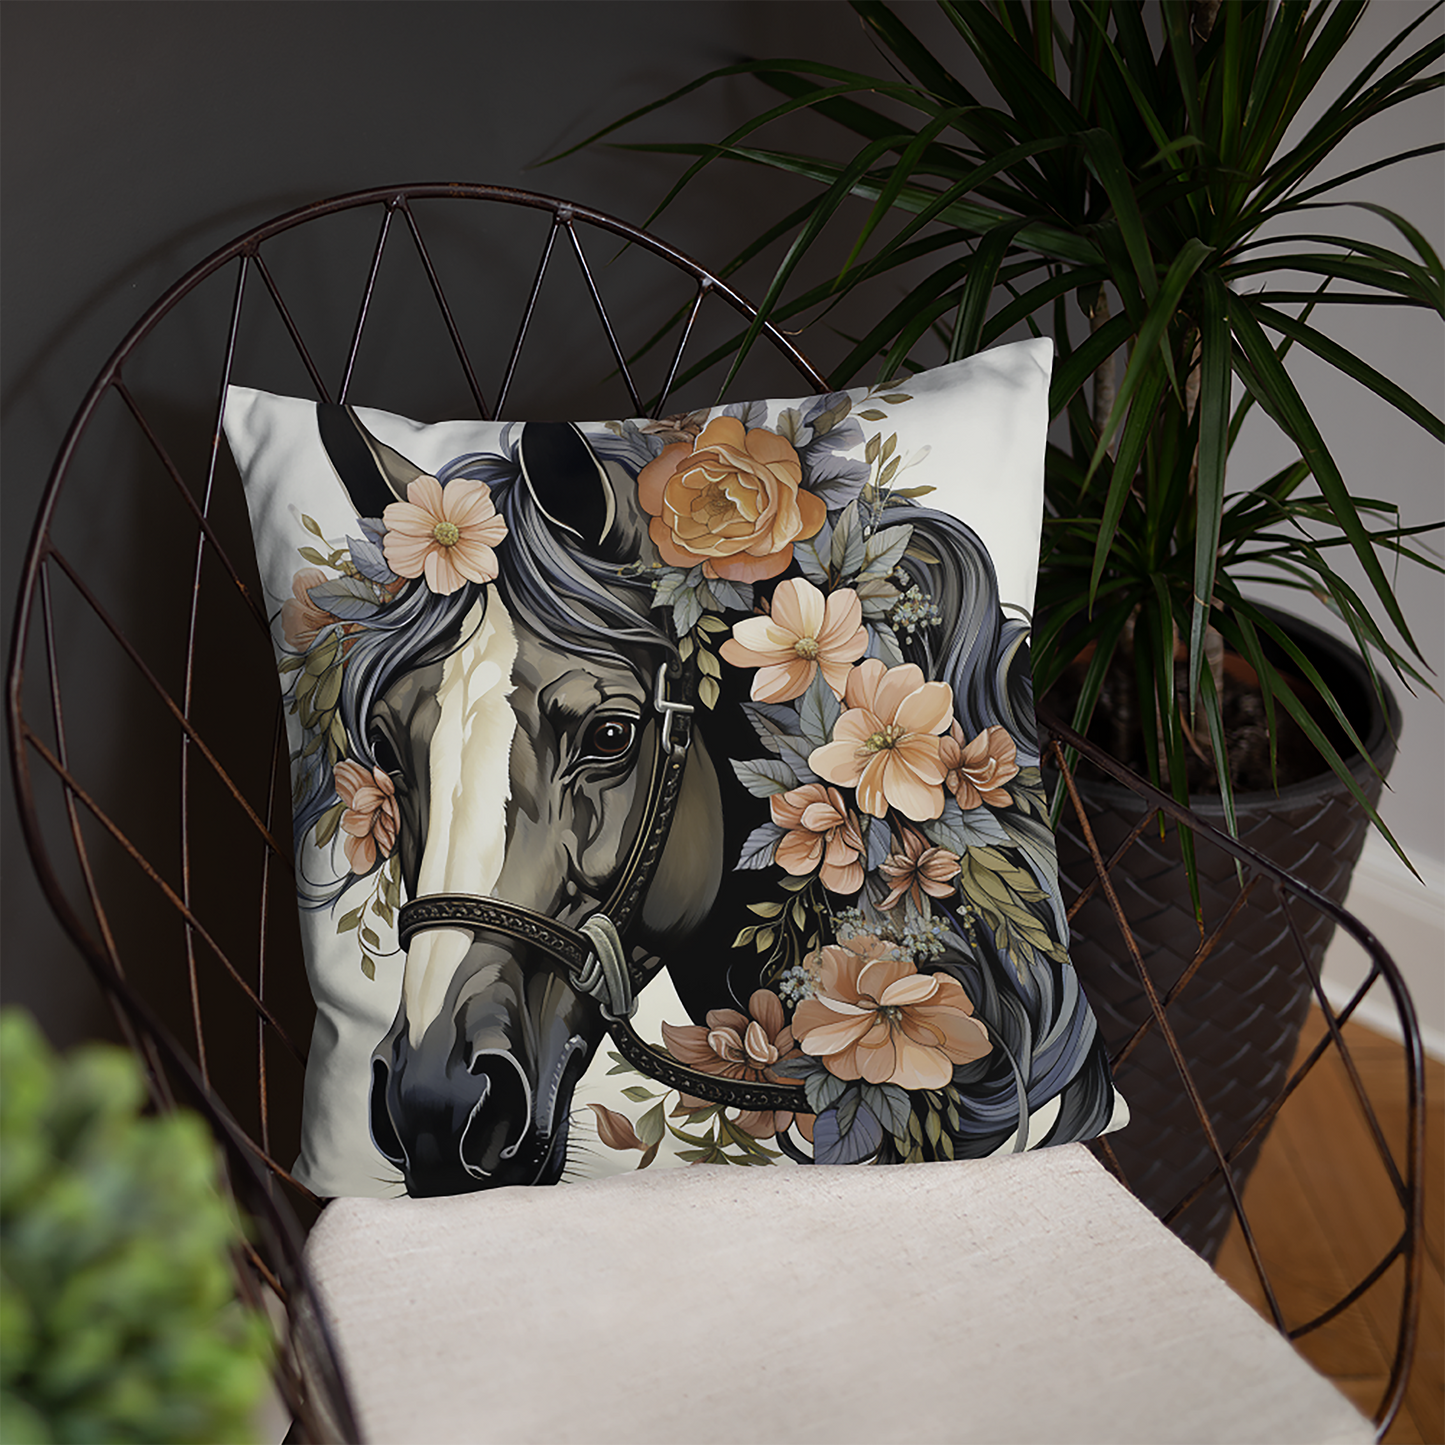 Horse Throw Pillow White Elegance Floral Comfort Polyester Decorative Cushion 18x18